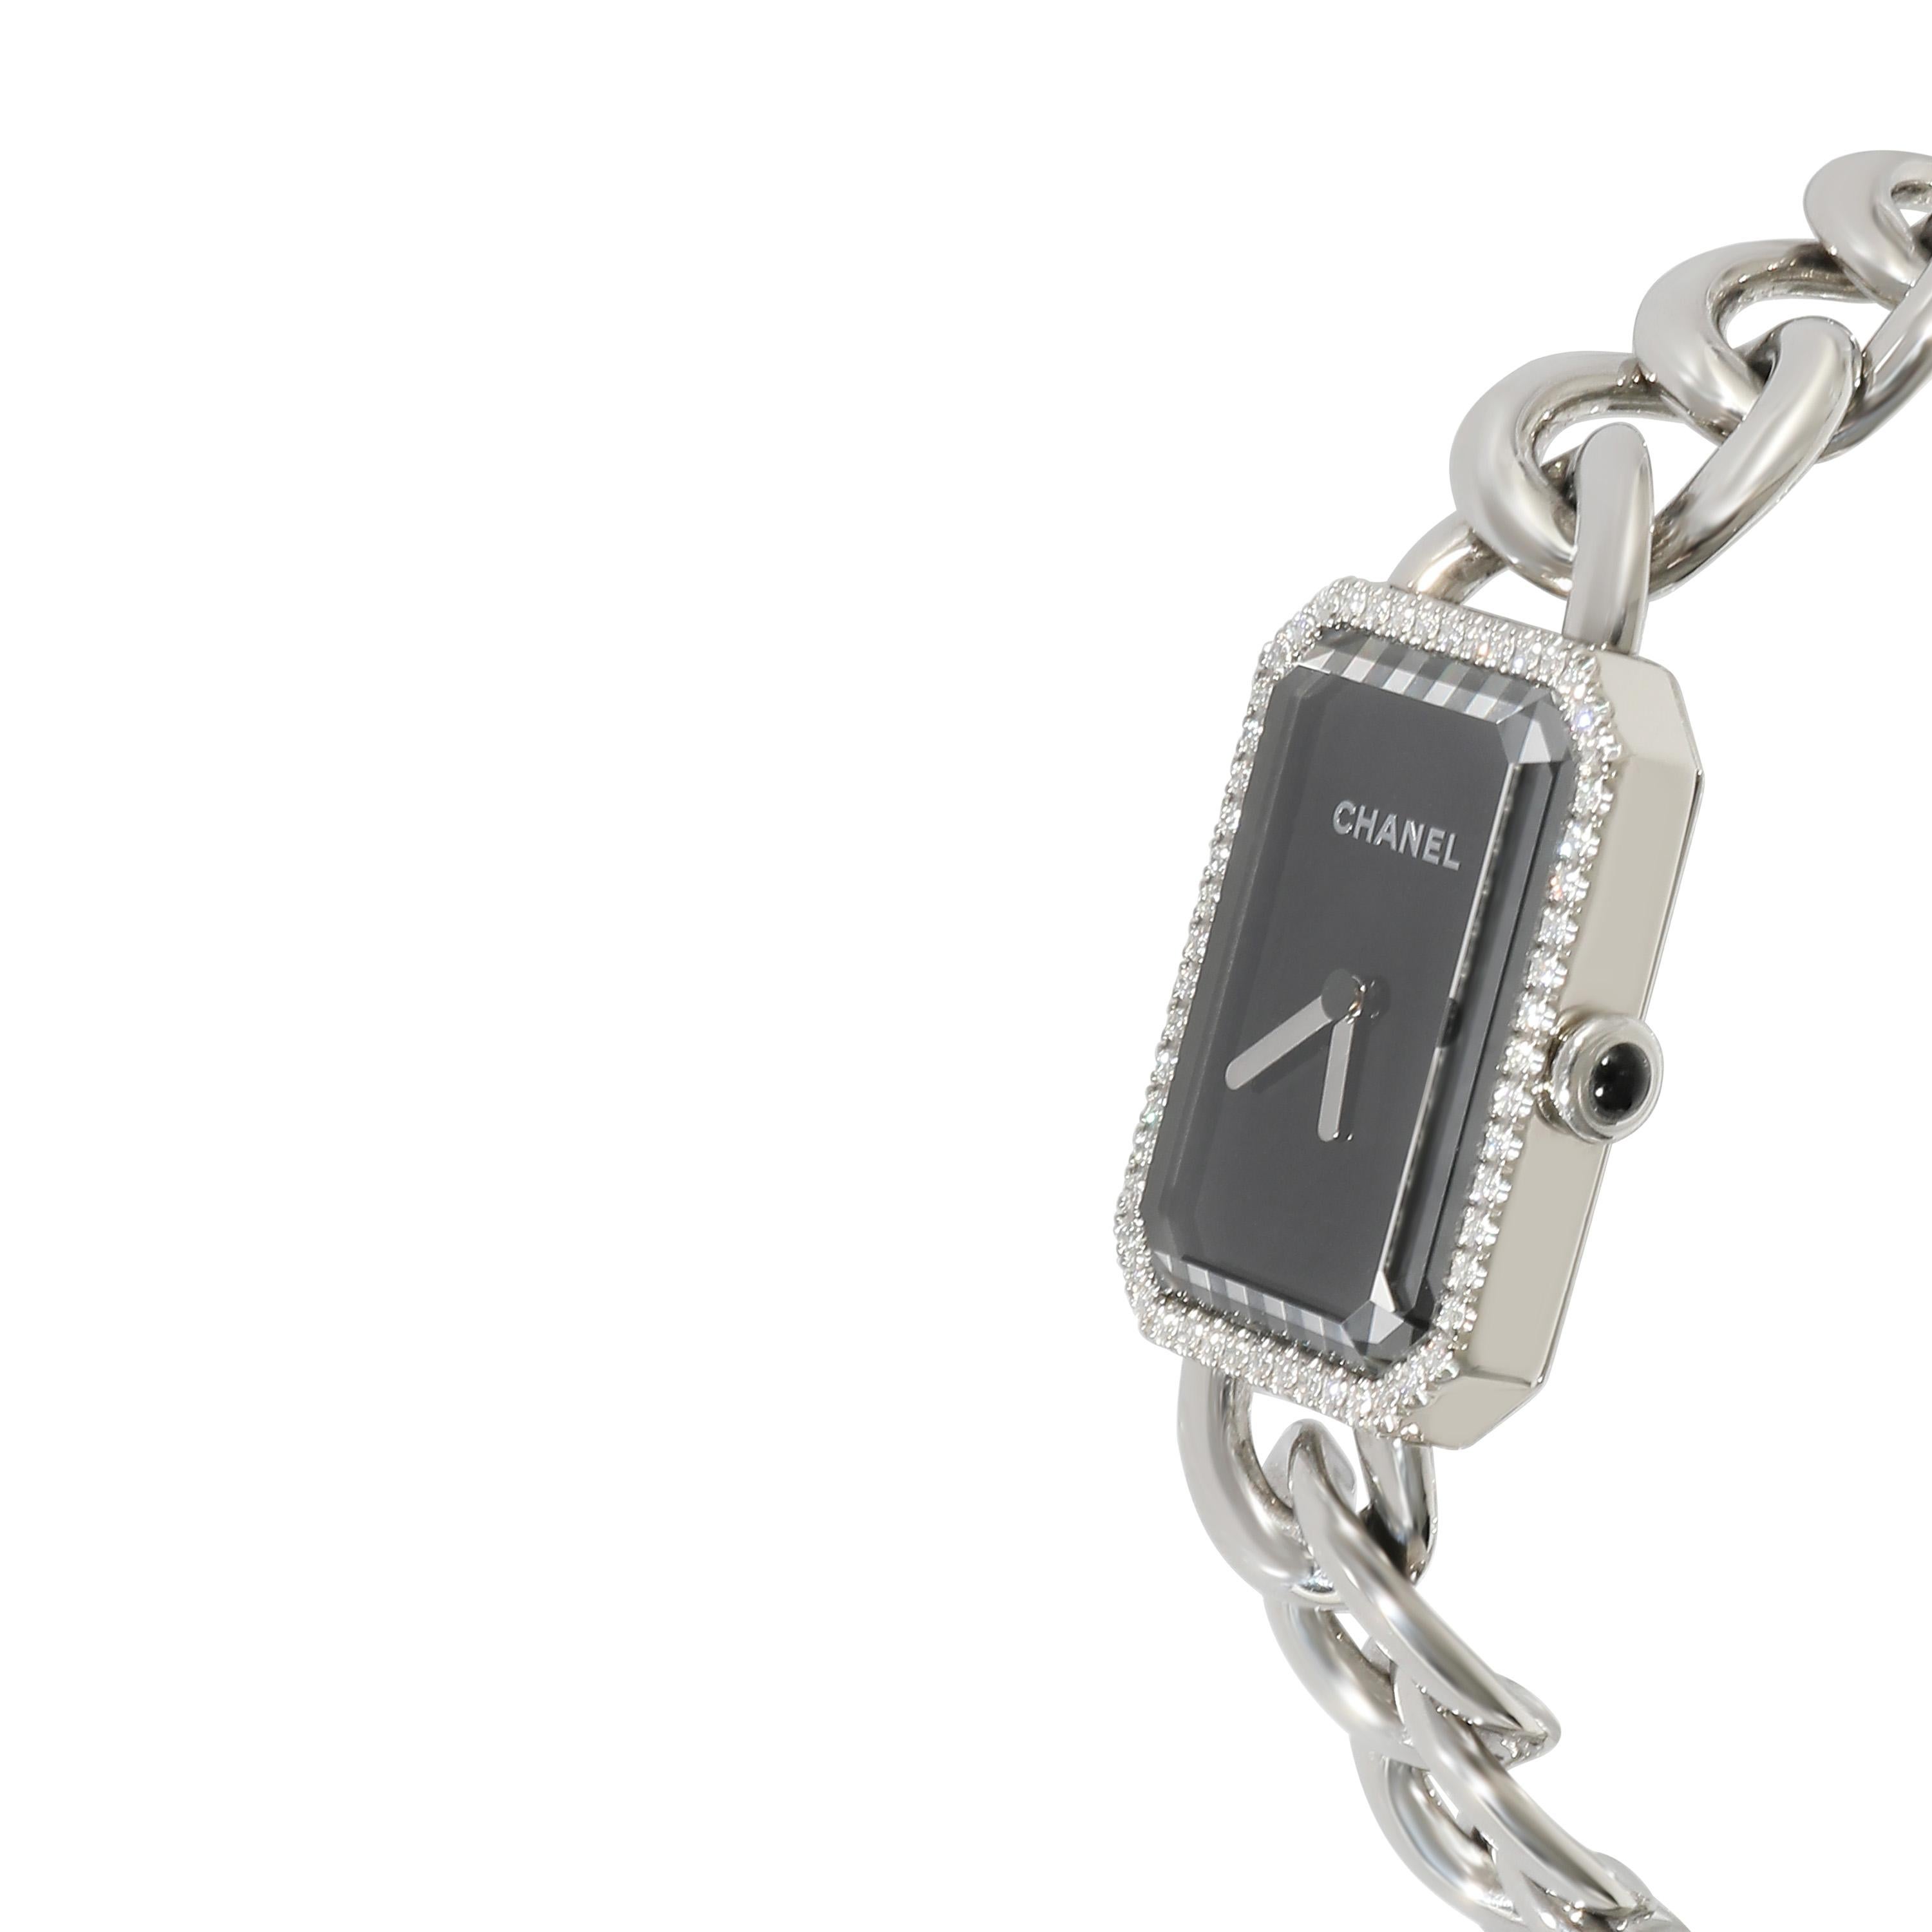 Chanel Premiere H3254 Women's Watch in  Stainless Steel In Excellent Condition For Sale In New York, NY